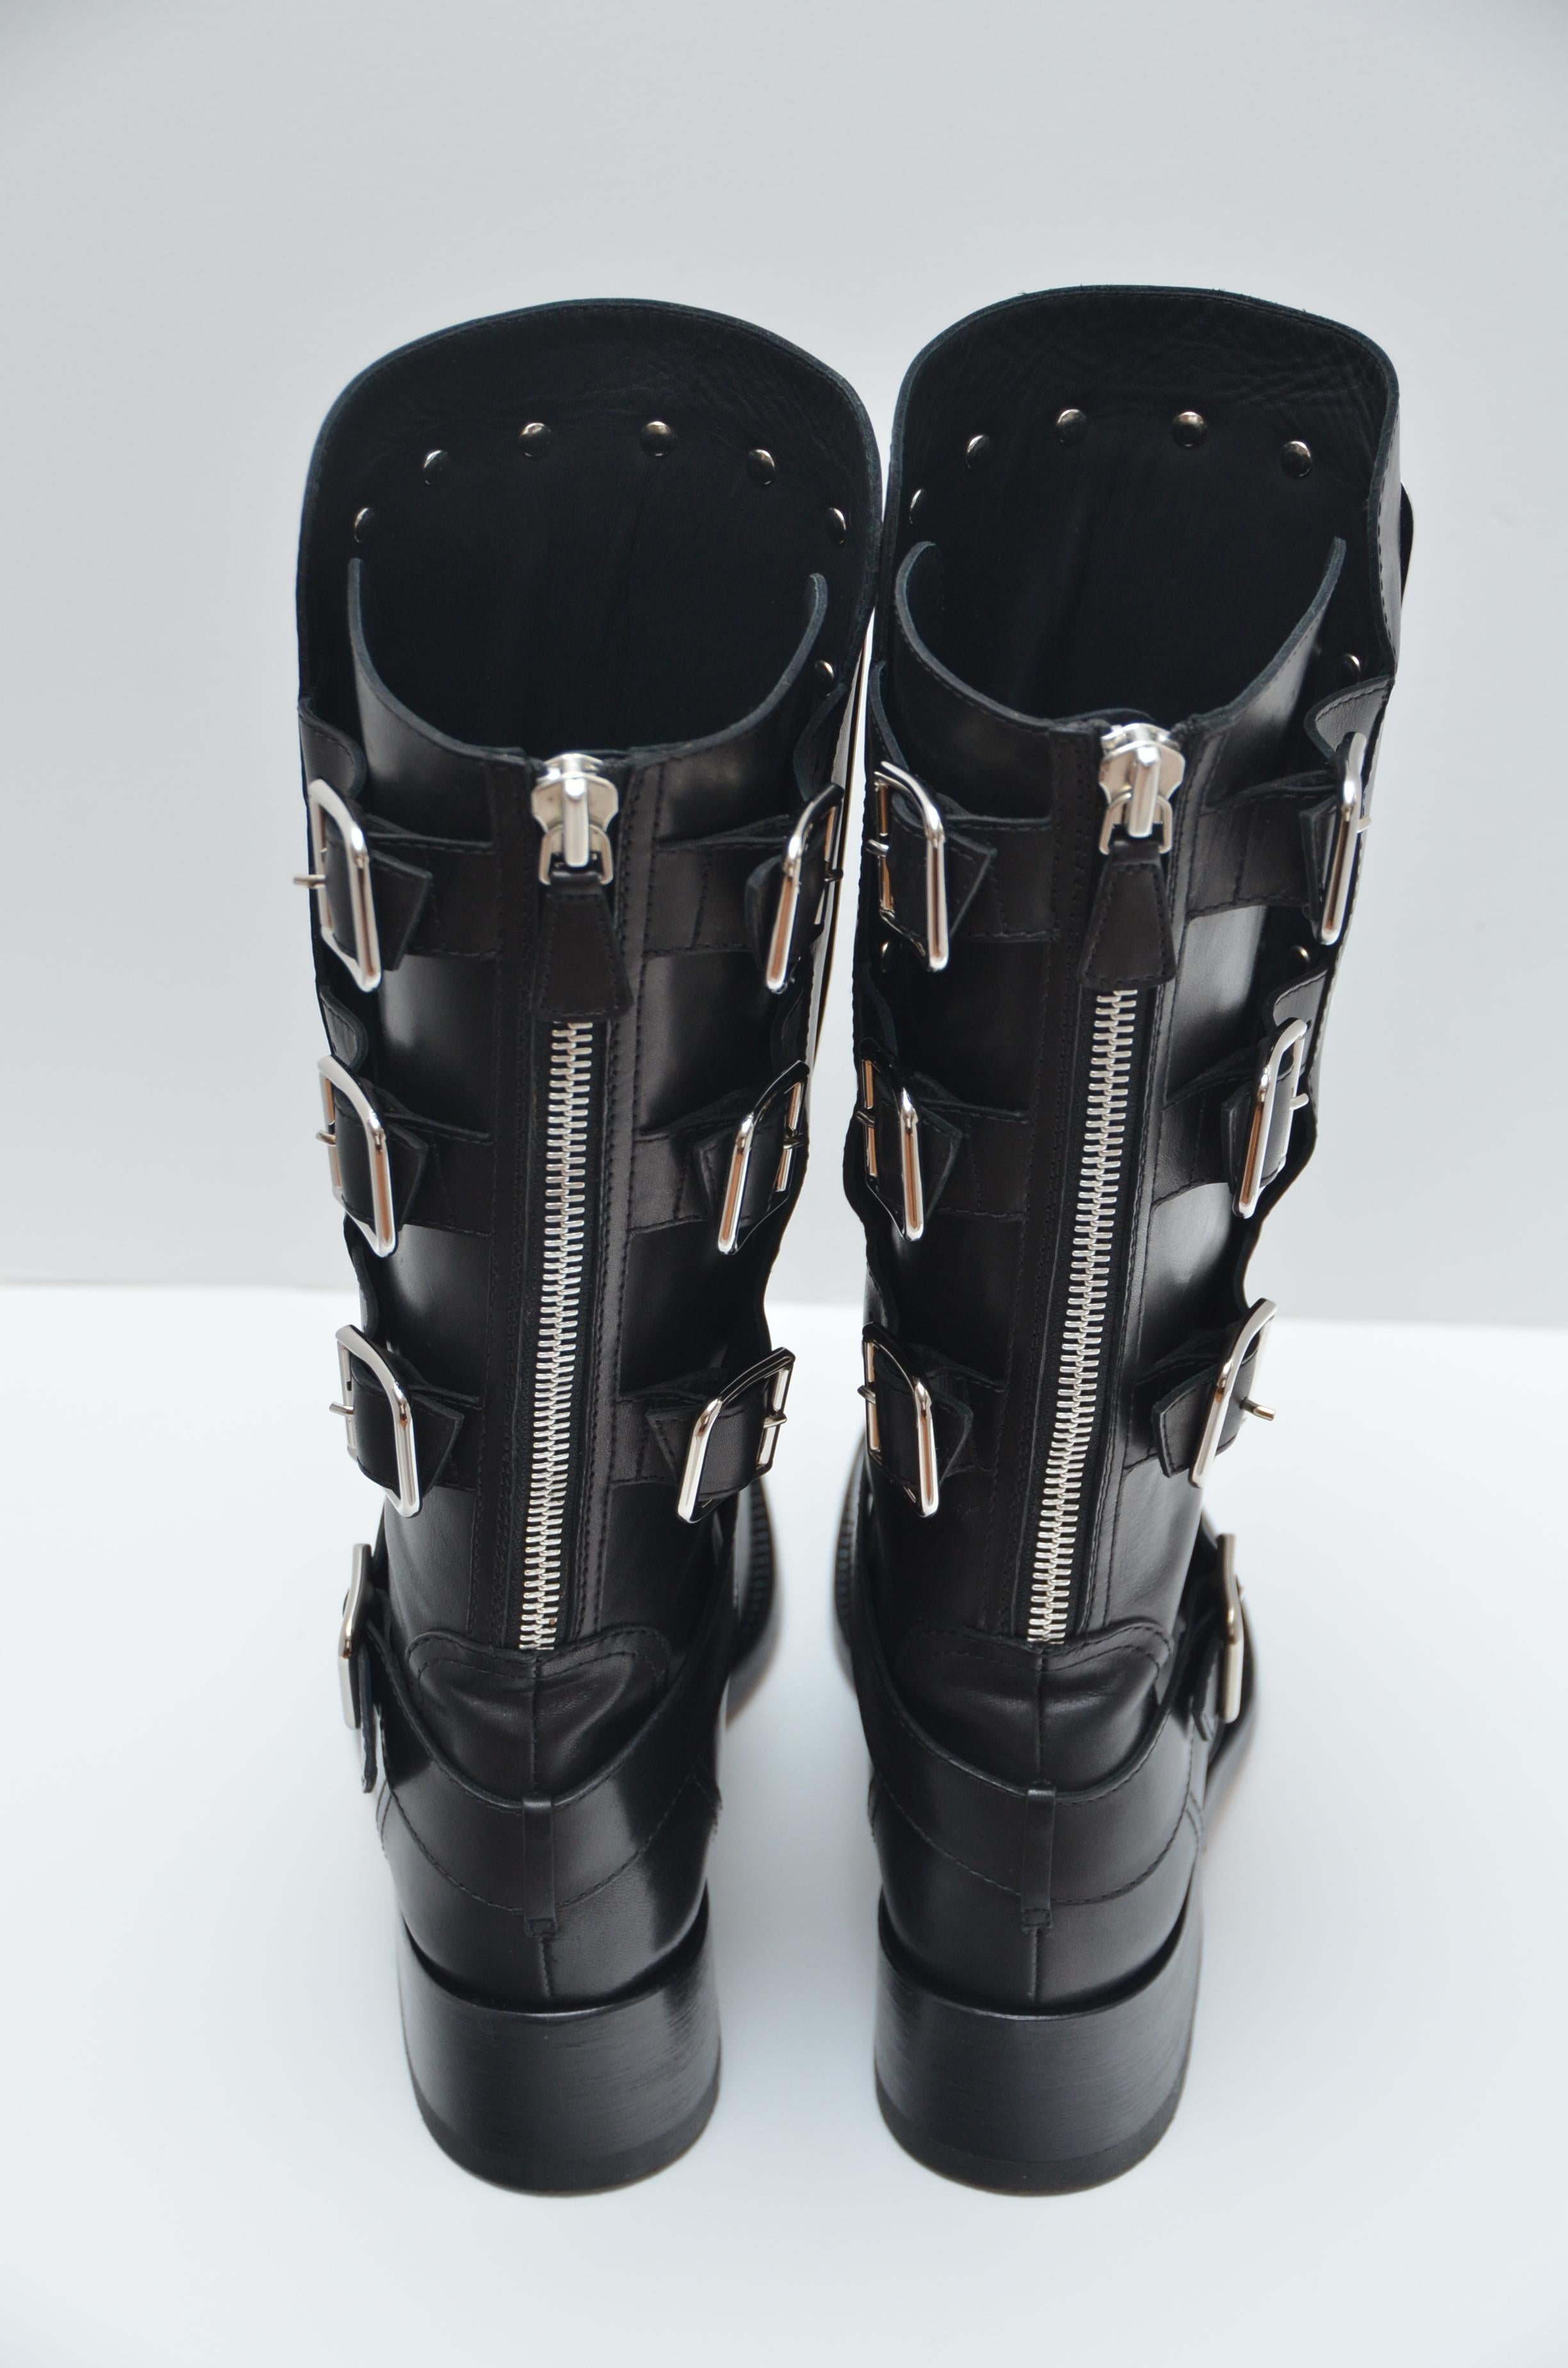 CHANEL Calfskin Biker Boots with Engraved Silver Plate Size 38 